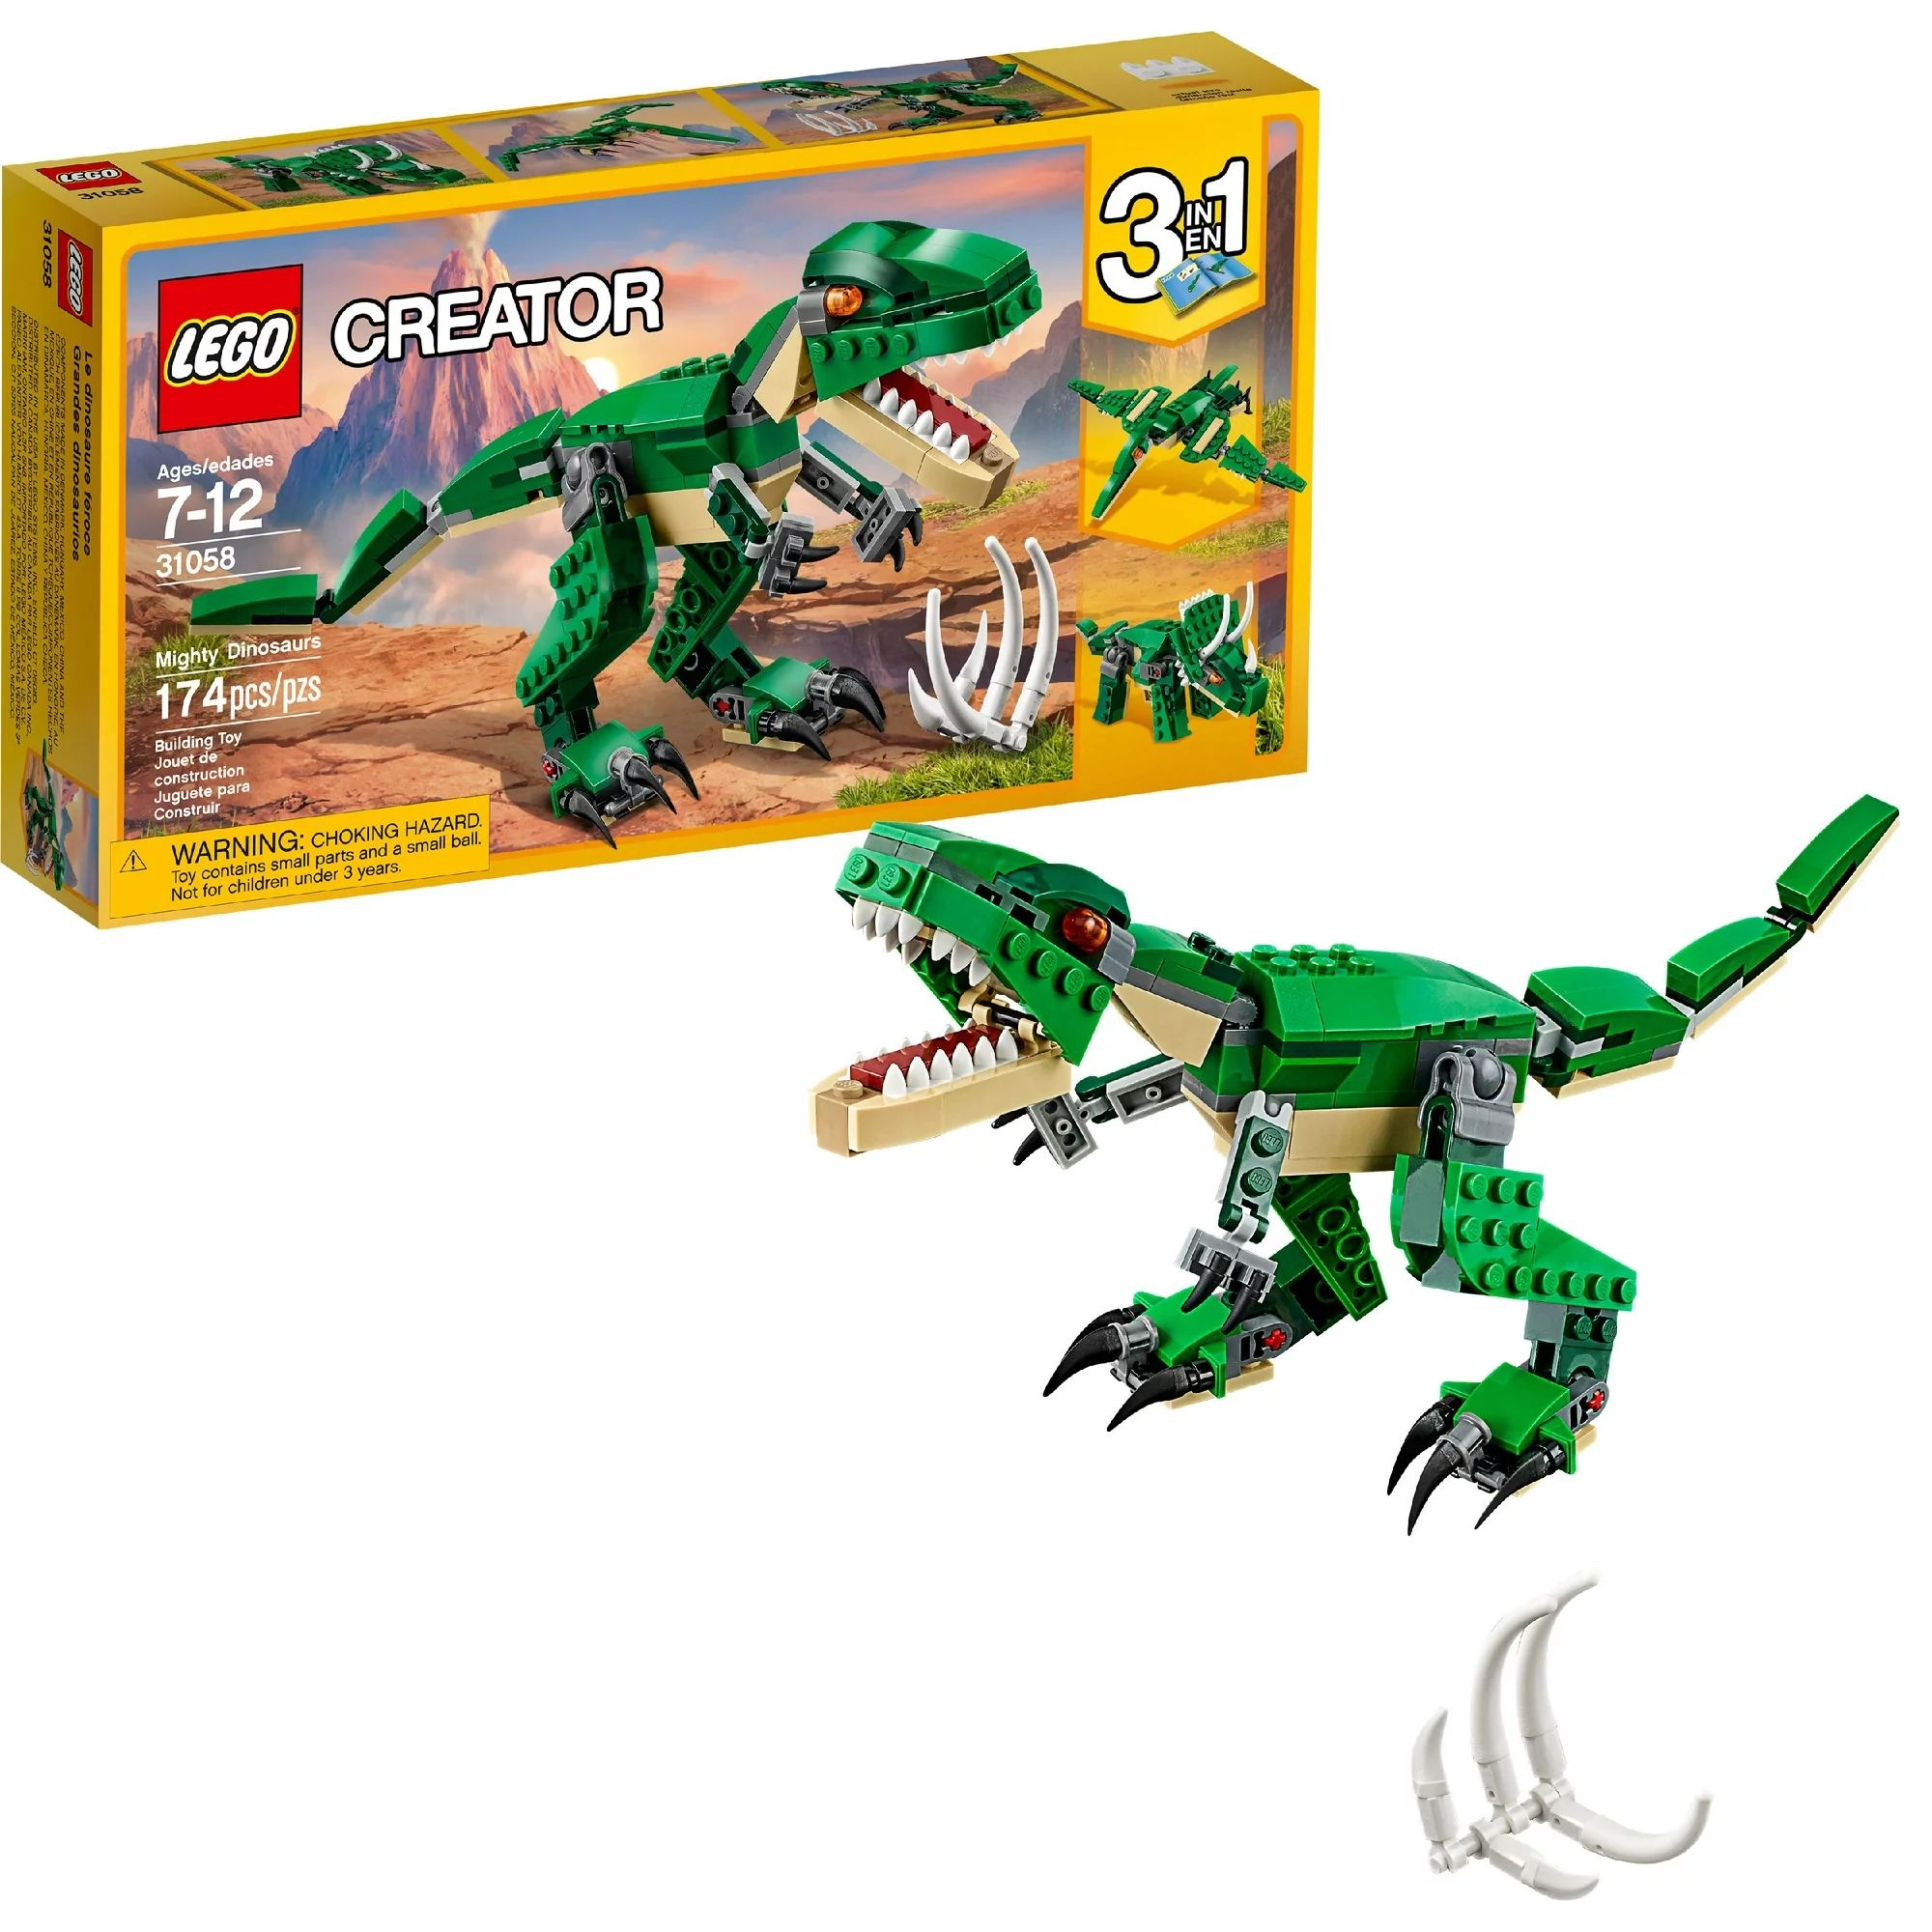 LEGO Creator Mighty Dinosaur Toy 31058, 3 in 1 Model, T. rex, Triceratops and Pterodactyl Dinosau... | Walmart (US)